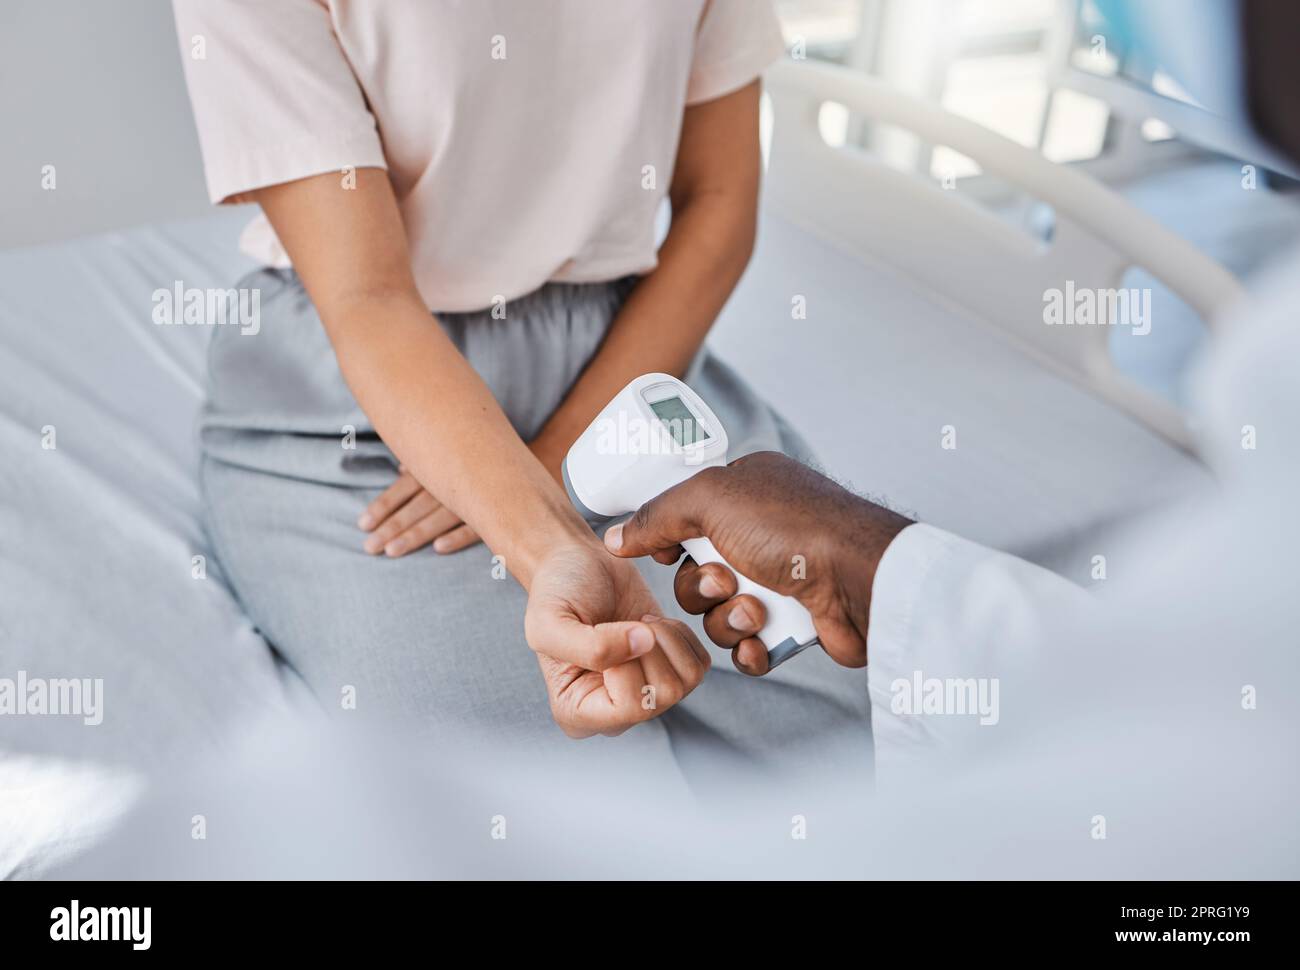 Doctor check temperature of sick covid patient to test fever, risk of disease or flu. Healthcare worker hands scanning with laser thermometer for virus safety and clinic service in medical hospital Stock Photo